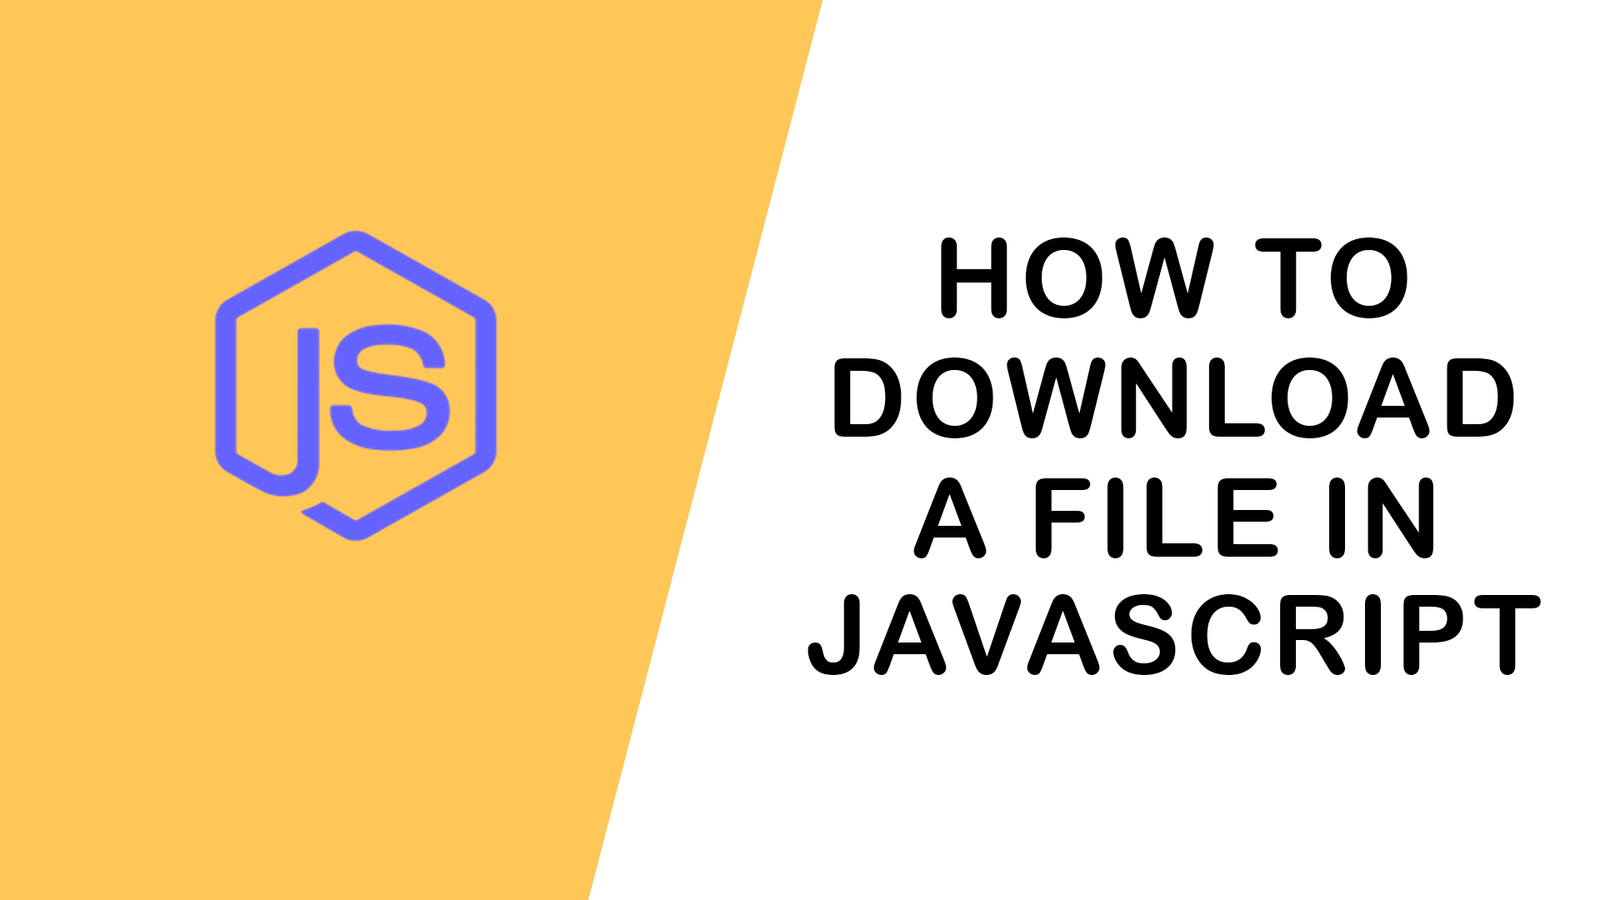 How to download a file in JavaScript